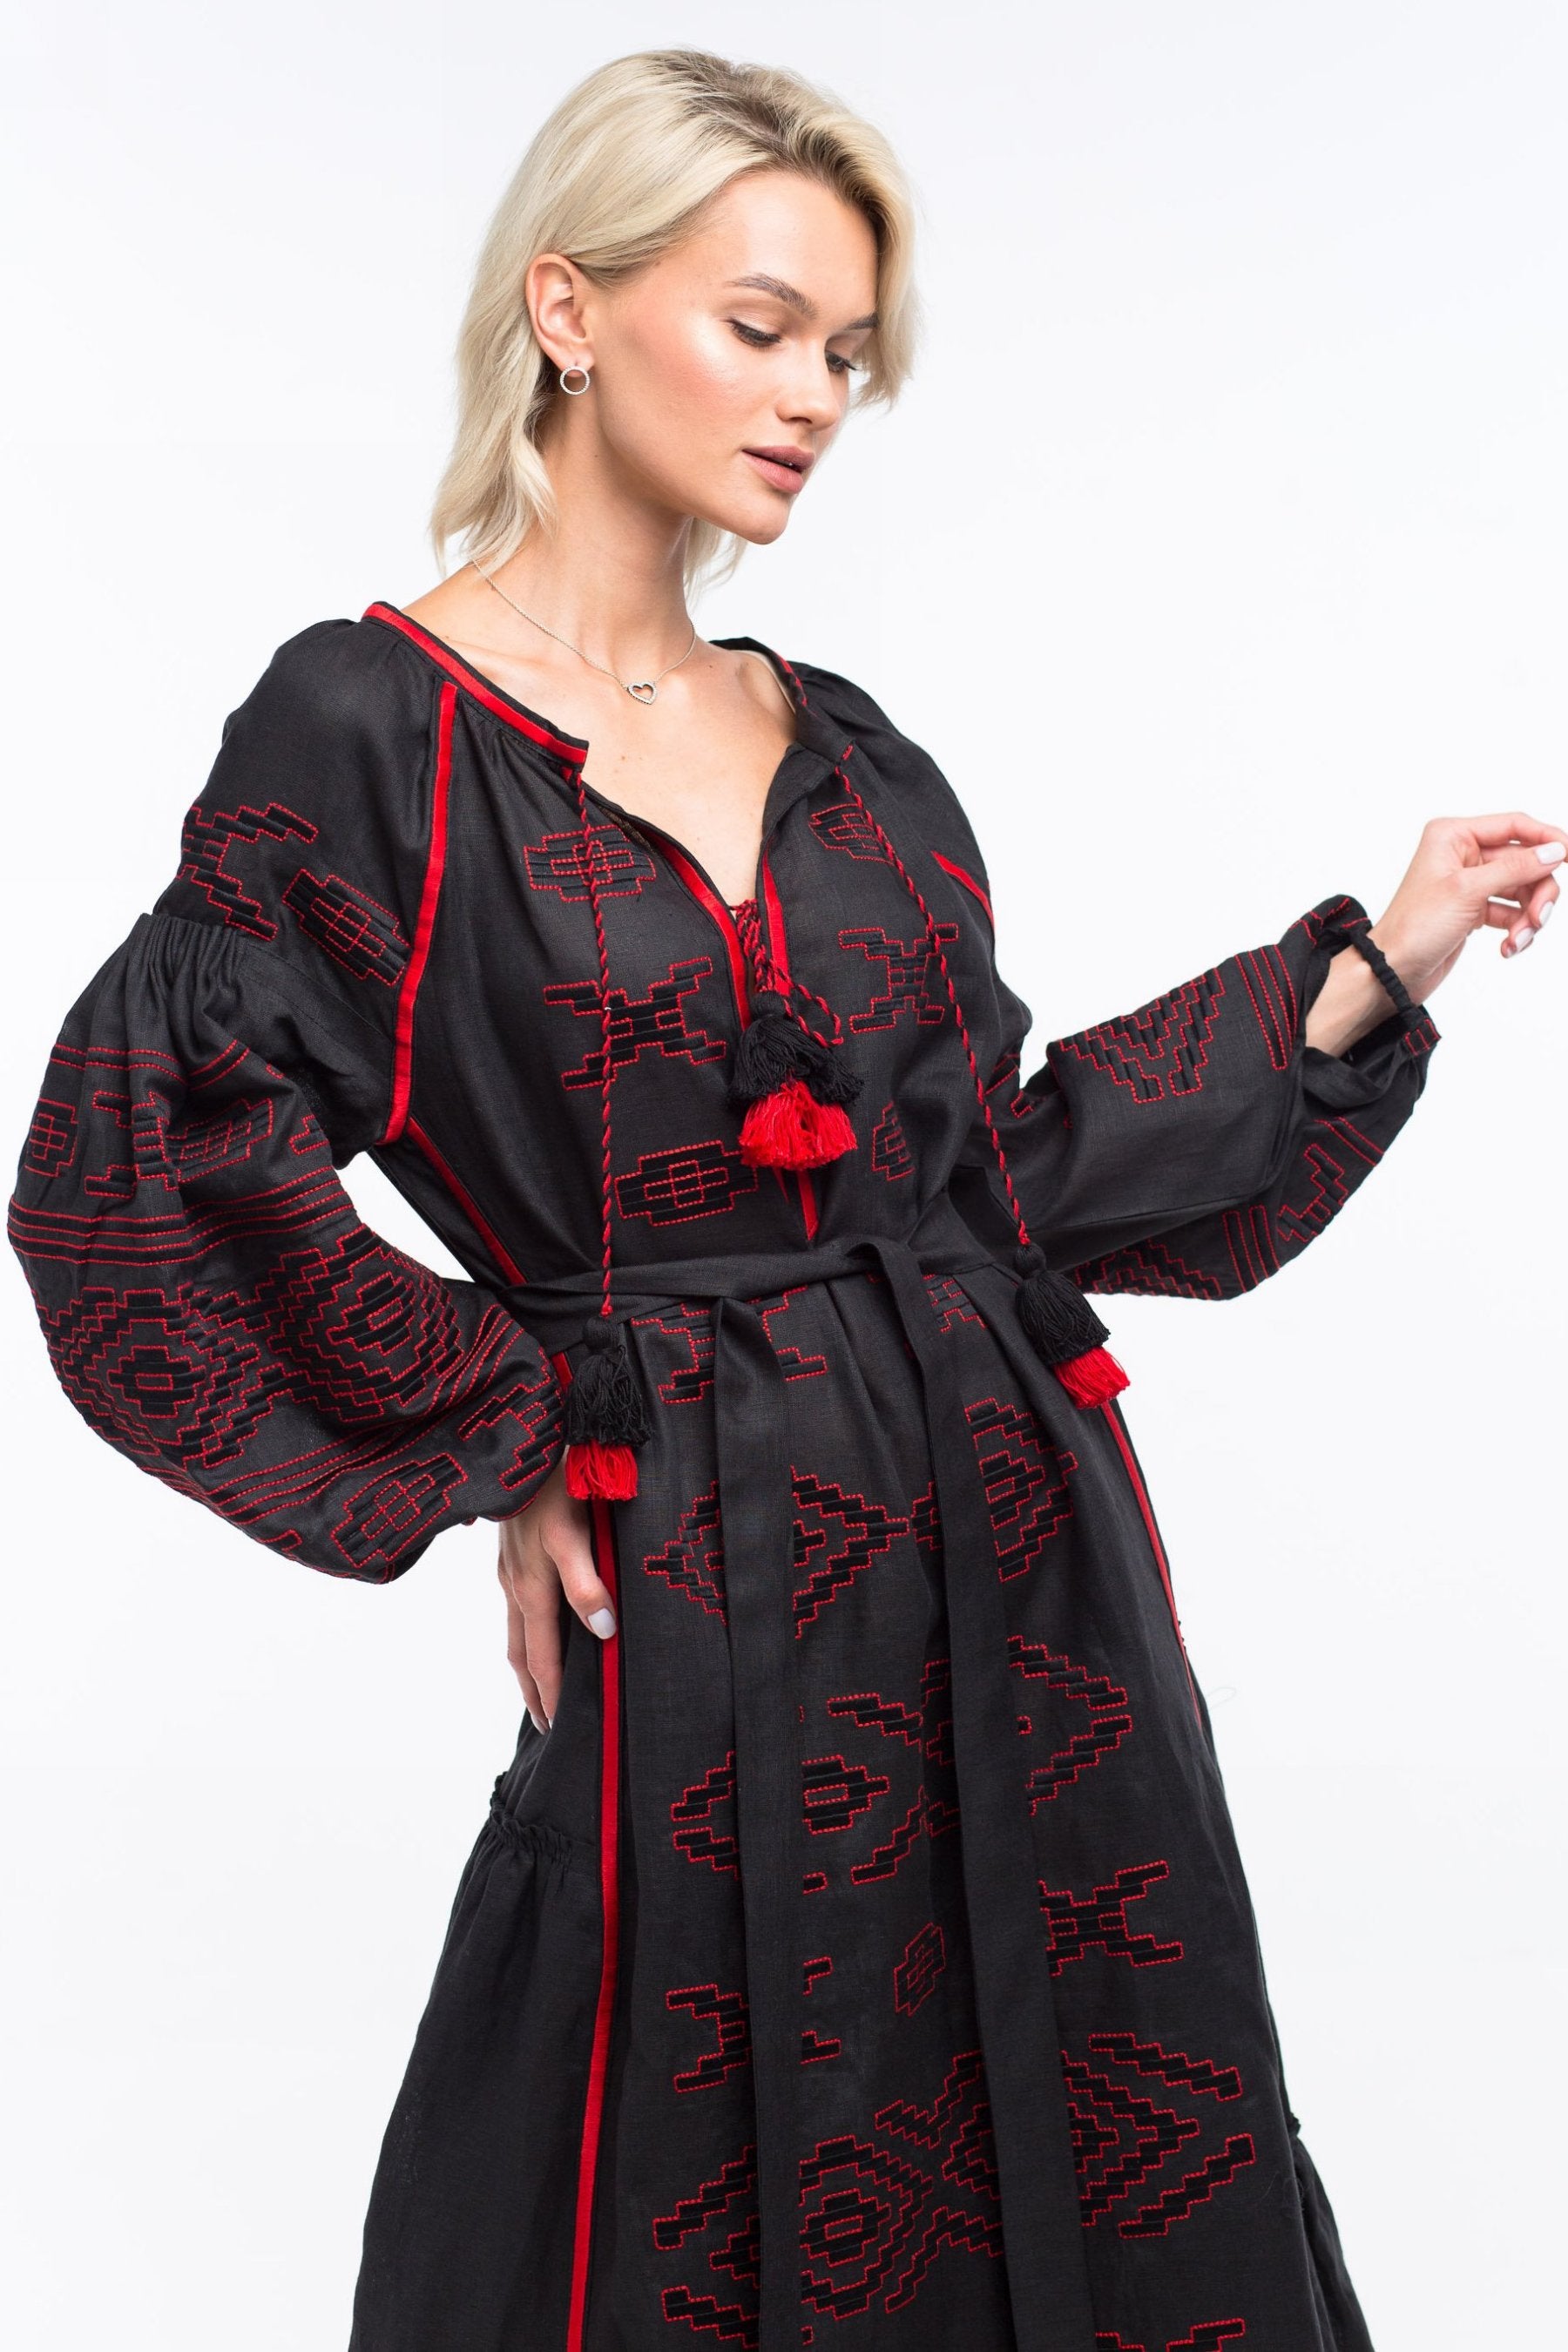 Serena embroidered dress Fashion wedding robe with ukrainian ethnic embroidery